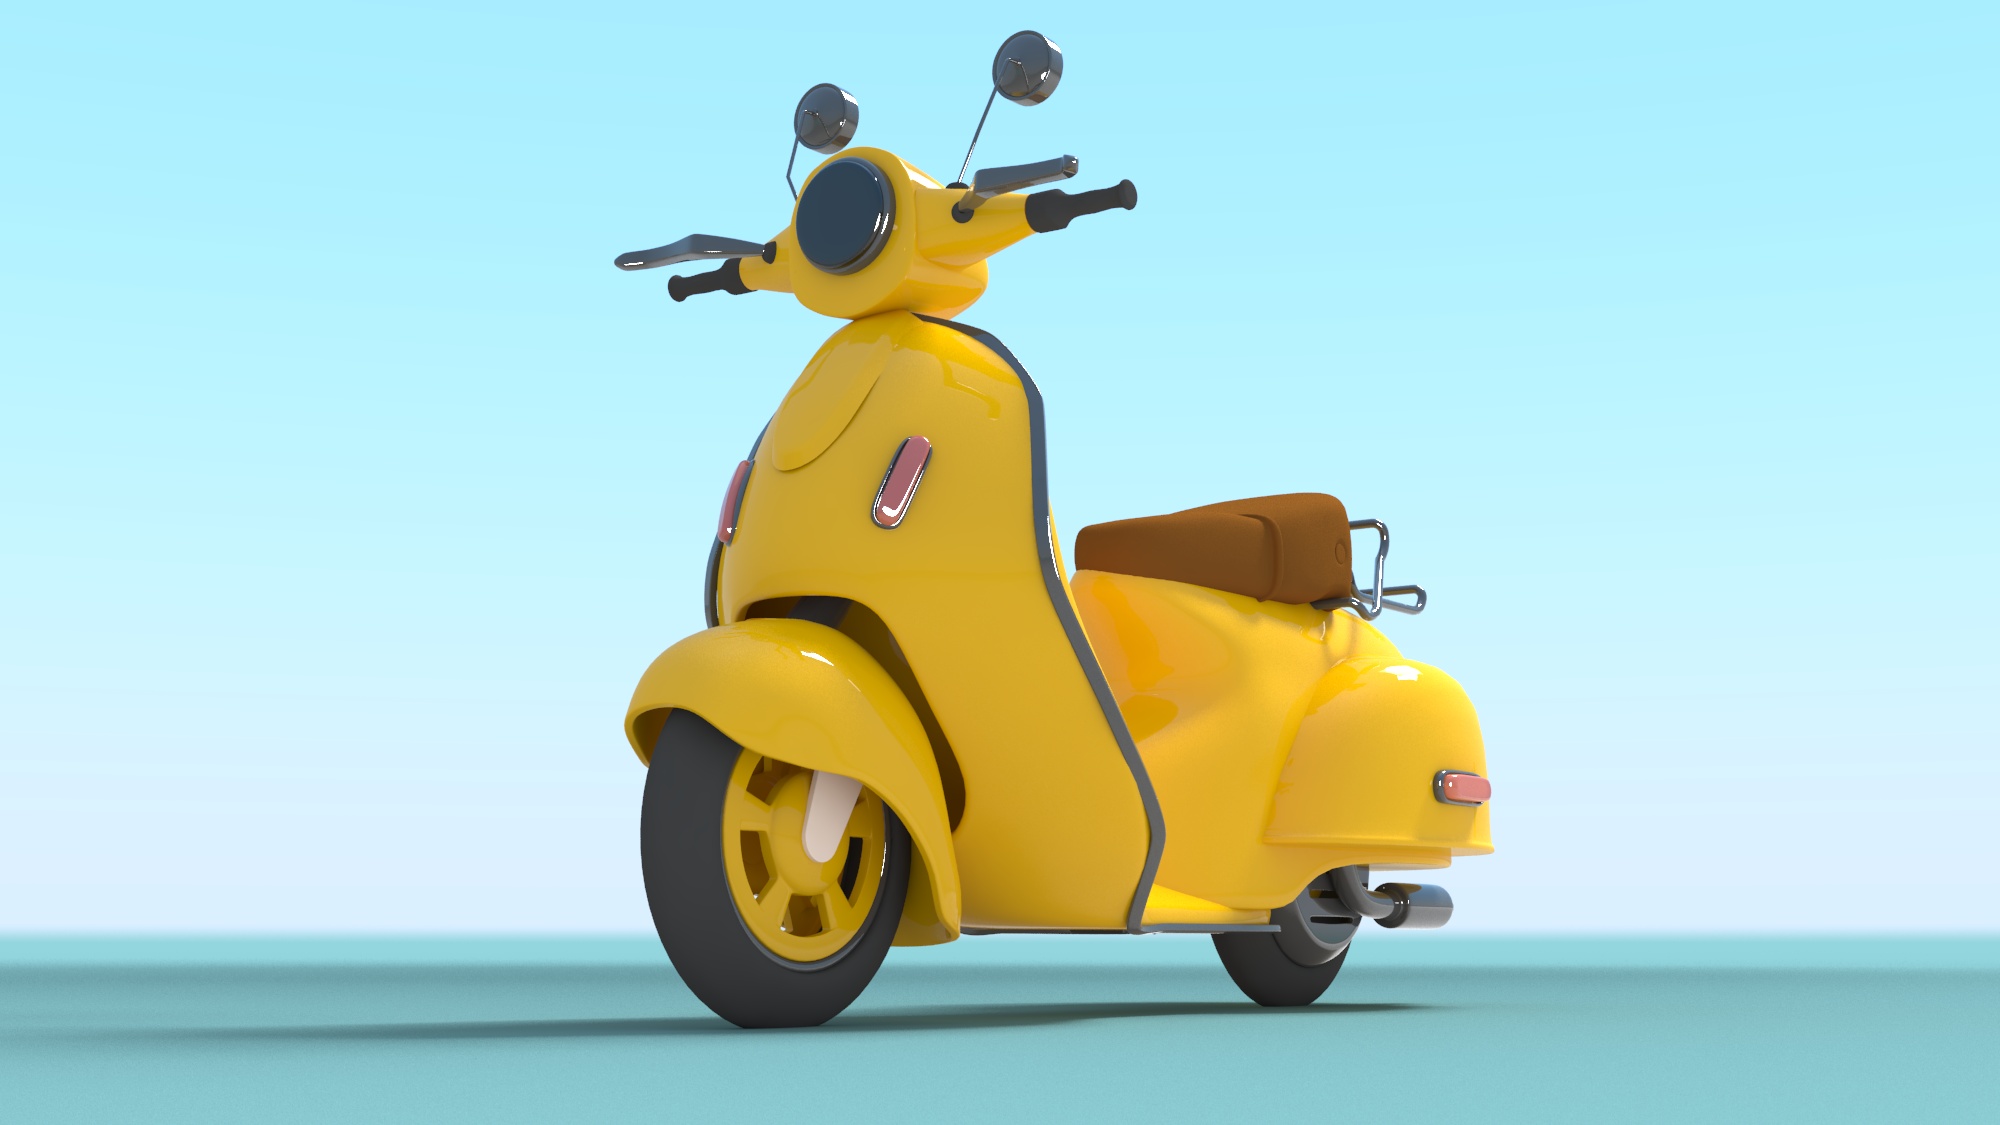 3D motorbike modelling and rendering